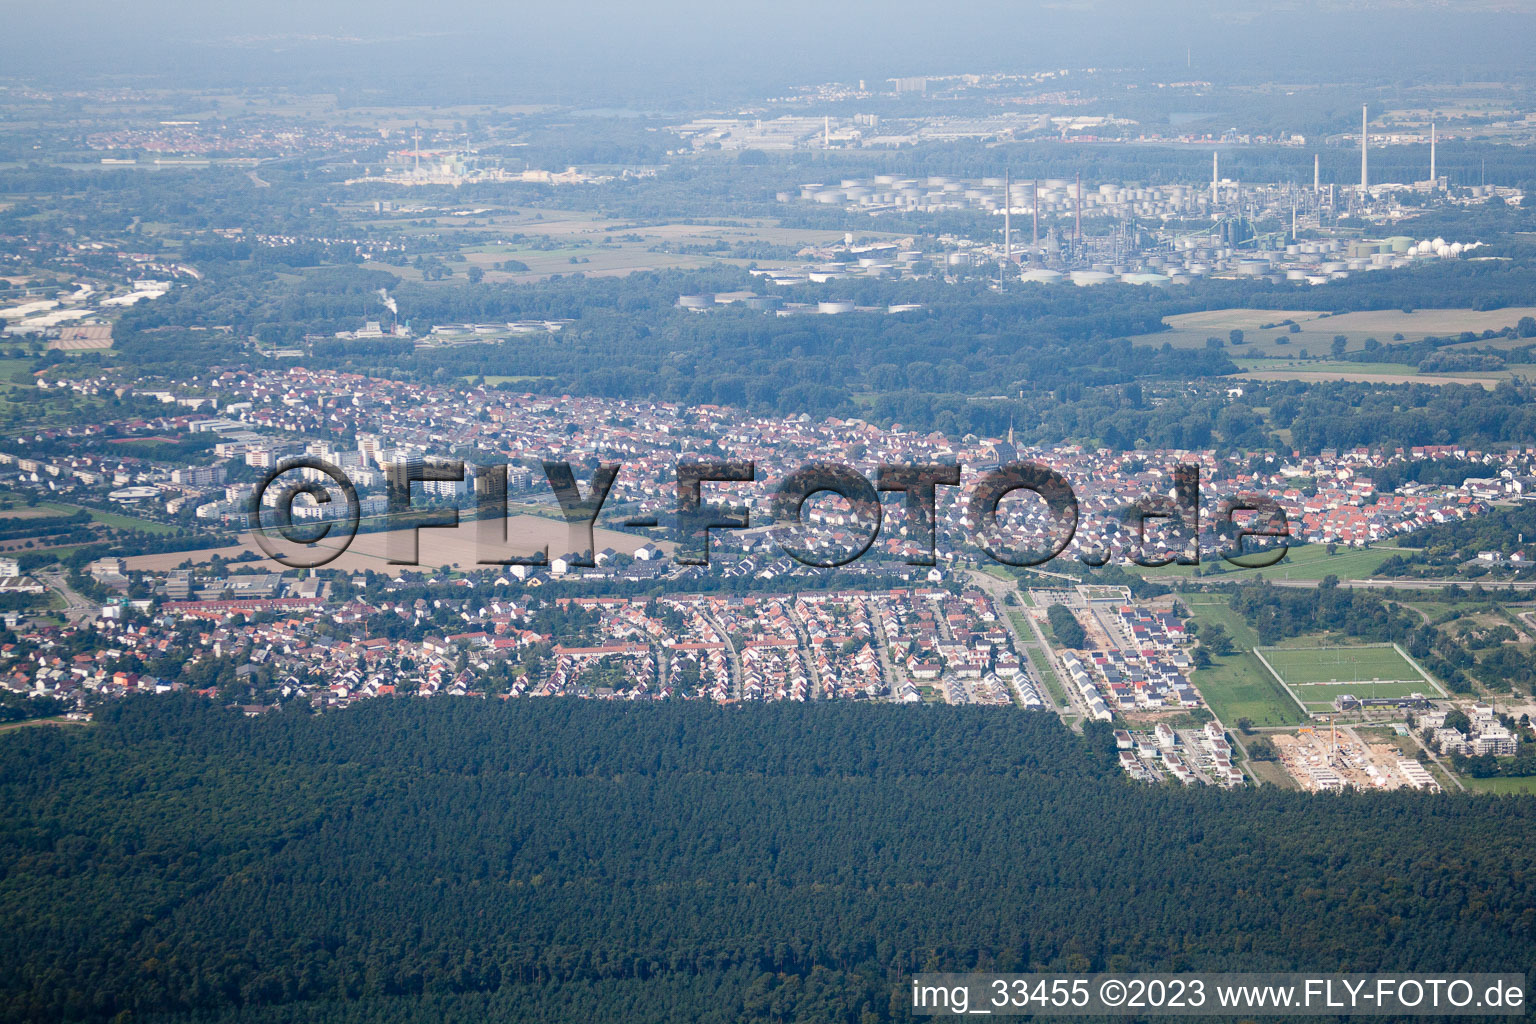 Kirchfeld settlement from the east in the district Neureut in Karlsruhe in the state Baden-Wuerttemberg, Germany